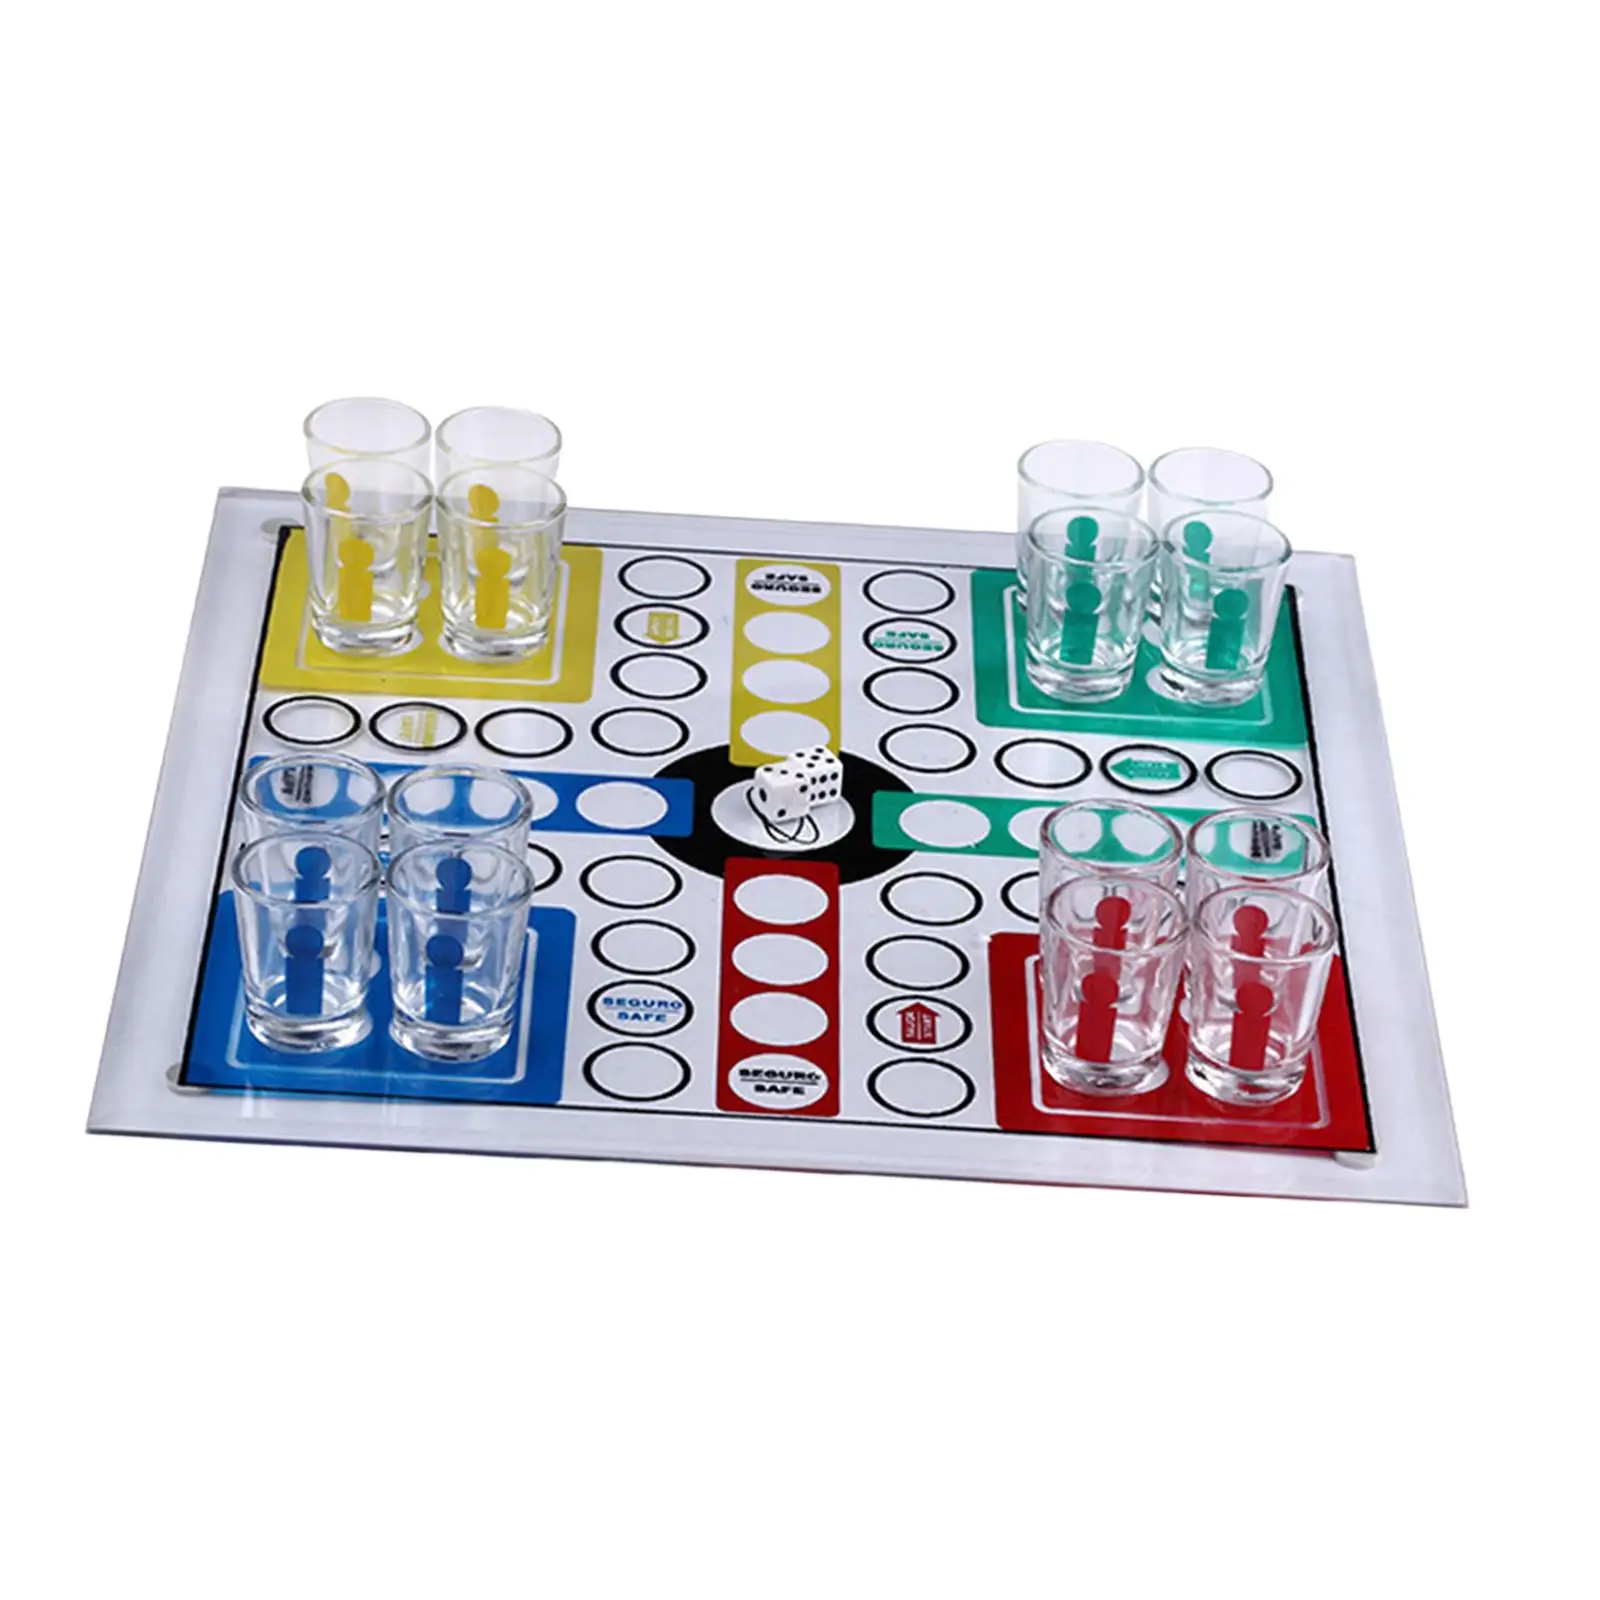 Flying Chess Games Novelty Family Party Game Entertainment Interactive Table Games Chess Game for Holiday Party Cafe Easter Bar